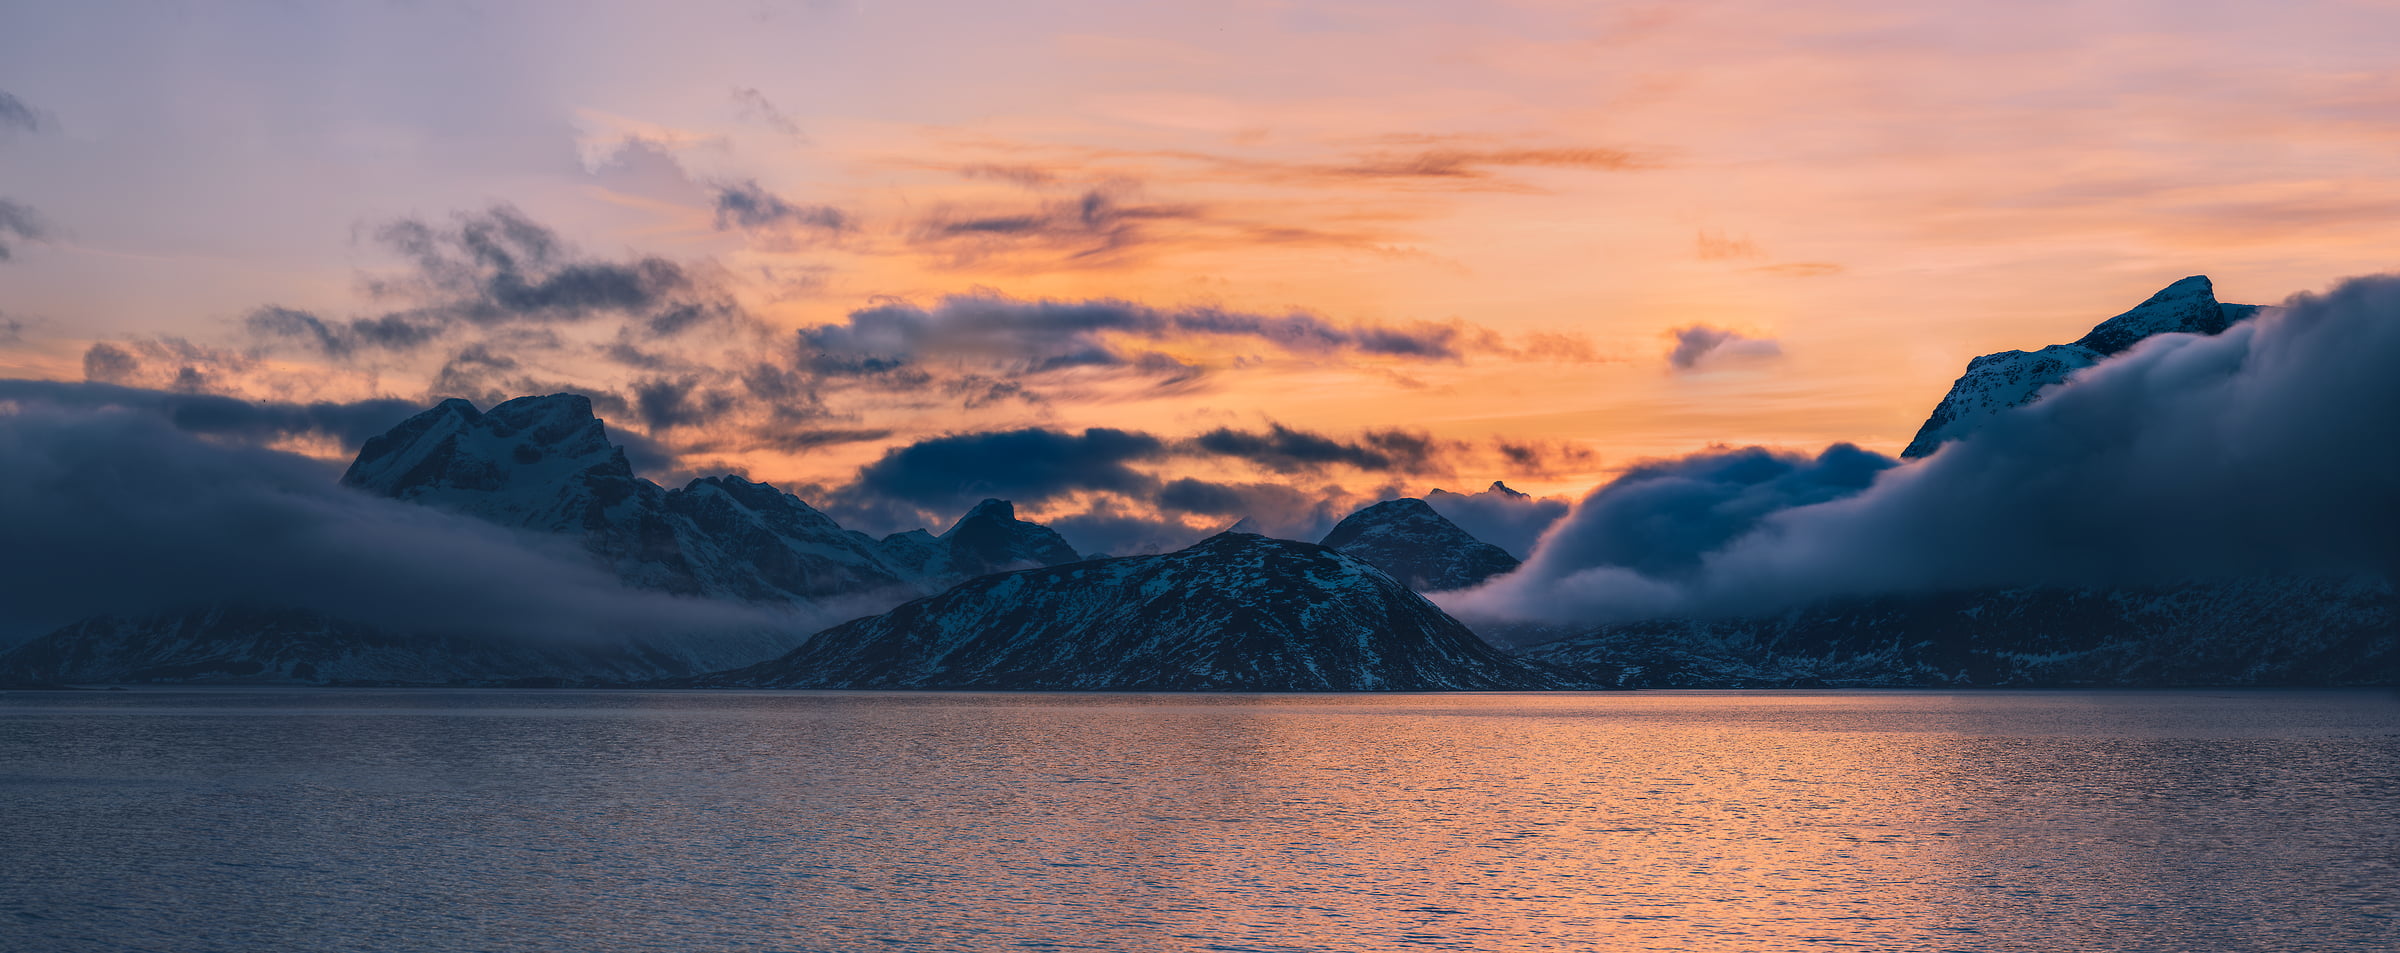 1,497 megapixels! A very high resolution, large-format VAST photo print of a Norway landscape with water and mountains at sunset; photograph created by Alfred Feil in Flakstadoy, Lofoten, Norway